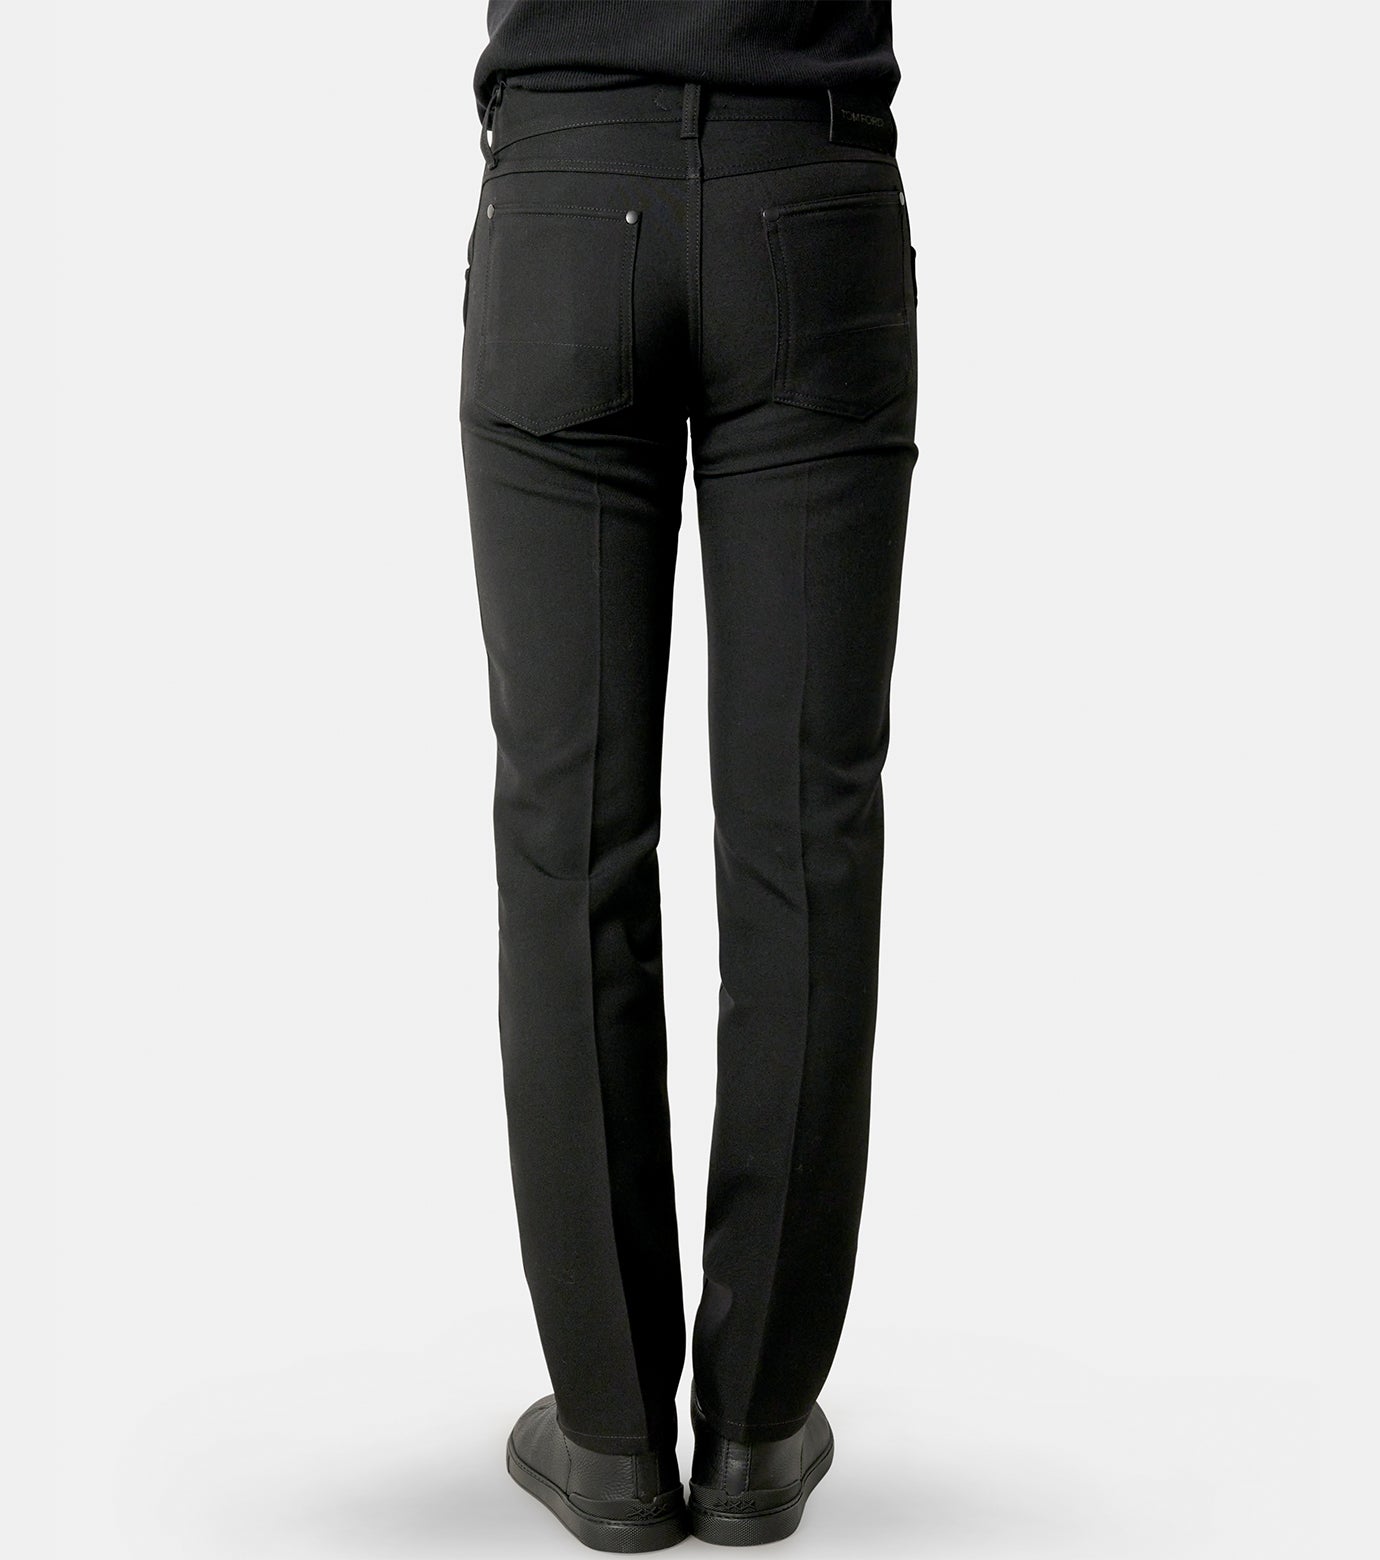 COMPACT WOOL TWILL SPORT PANT